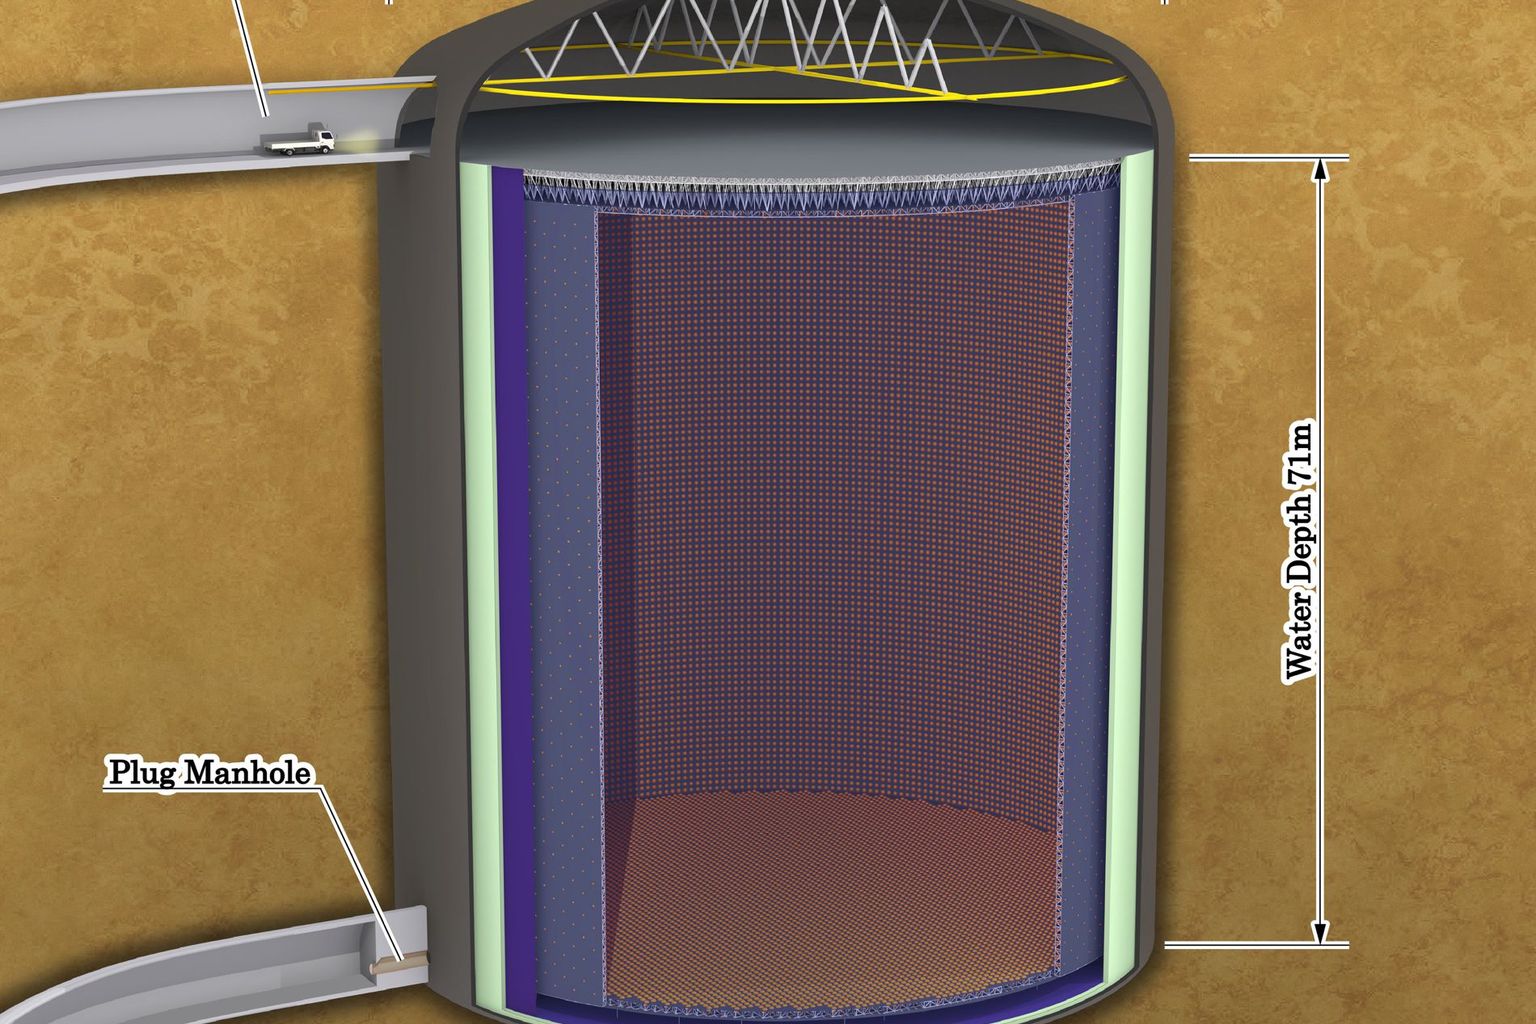 The Hyper-Kamiokande detector consists of a giant, cylindrical water tank 71 meters high and 68 meters in diameter. Illustration: Hyper-Kamiokande Collaboration